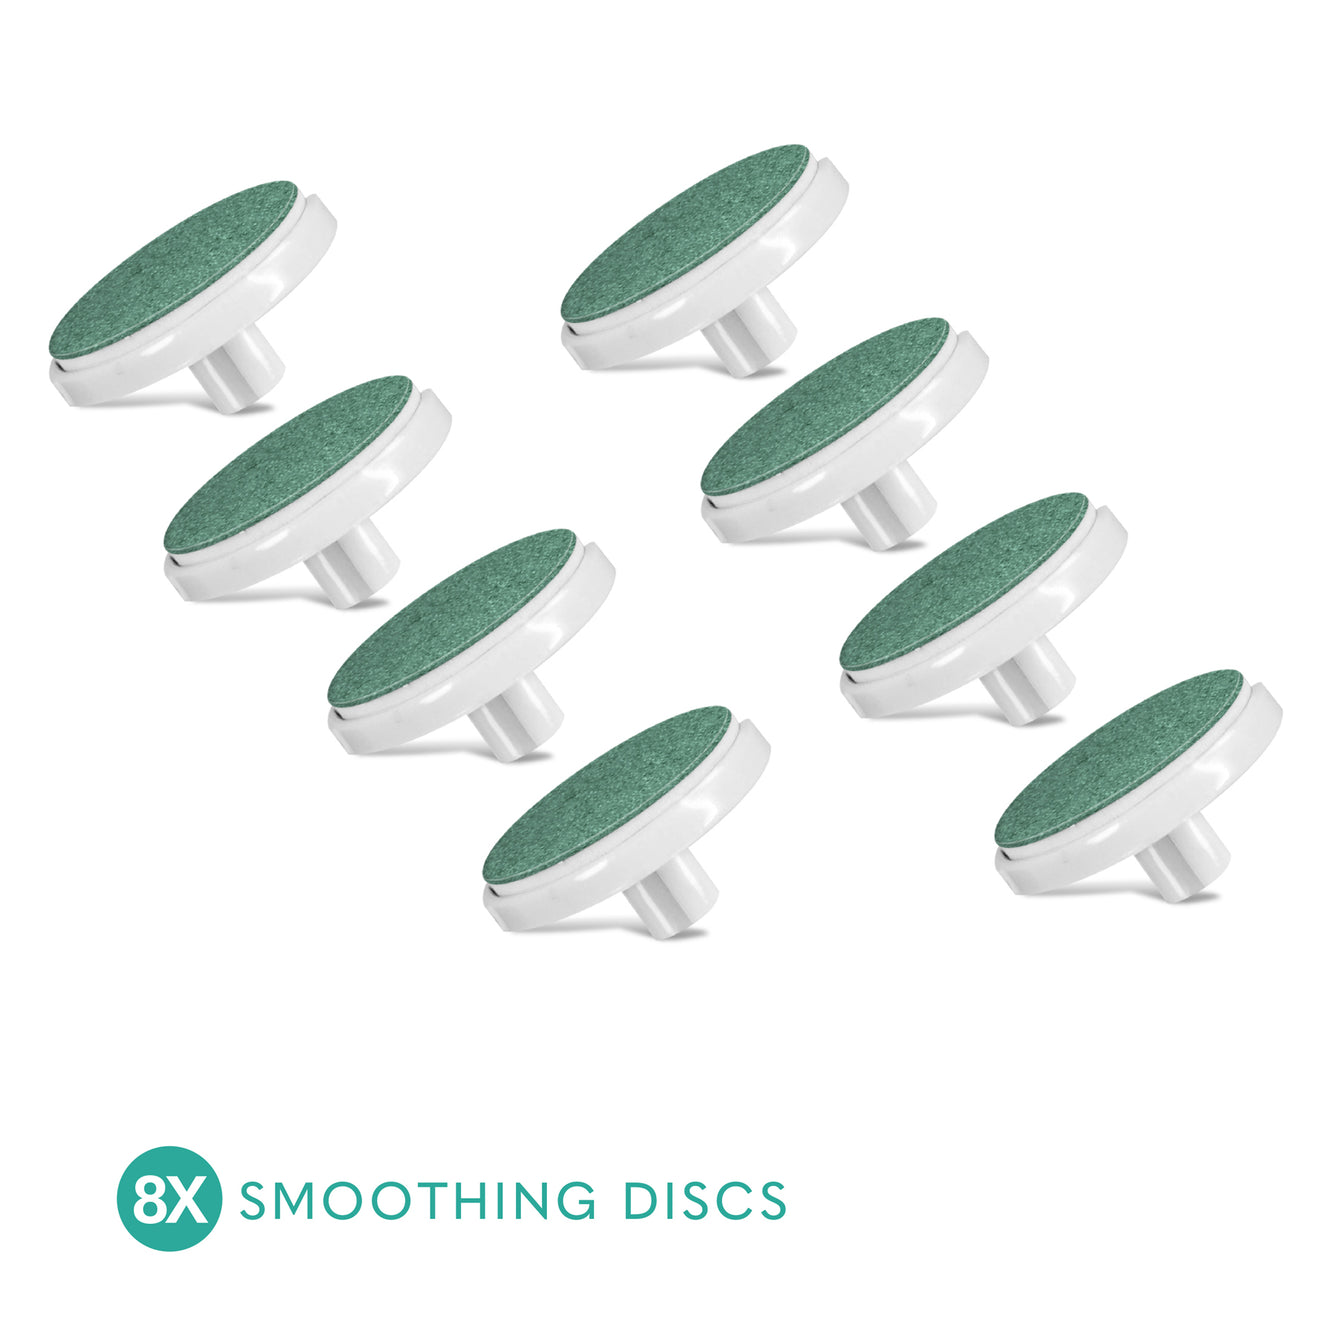 Replacement Discs for Bellasonic 4-in-1 Rechargeable Electric Nail File Set with Unique Oscillating Head – 8 SMOOTHING DISCS – Green